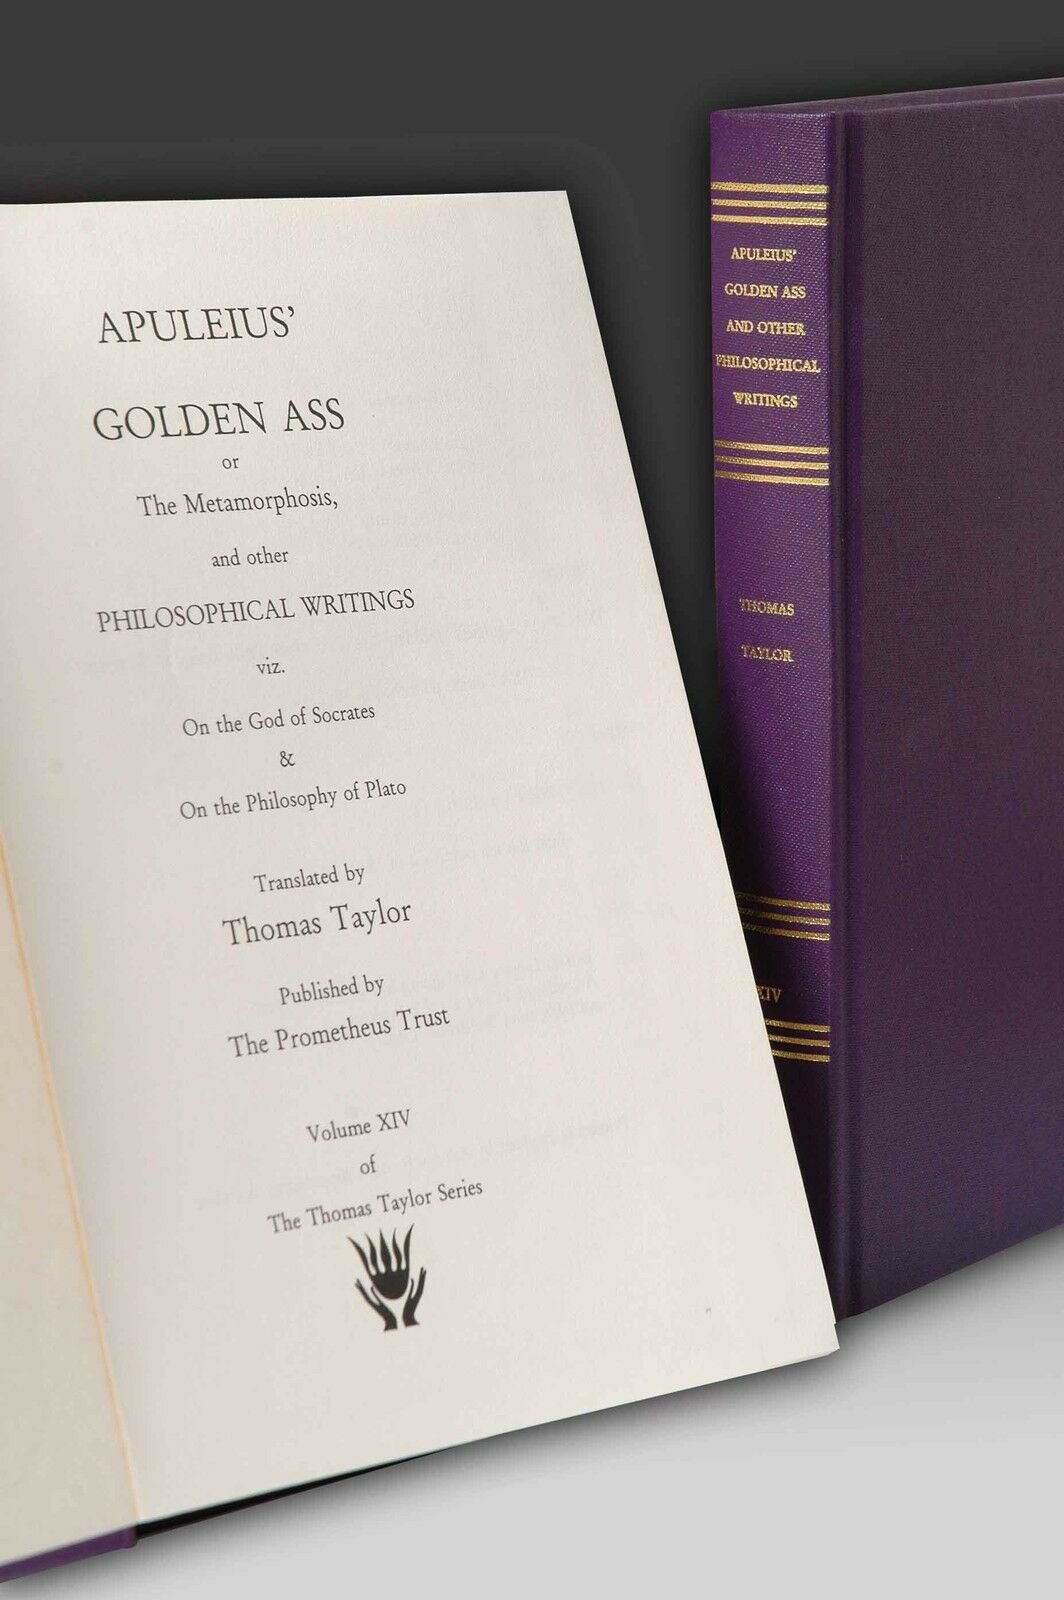 Apuleius' Golden Ass and Other Philosophical Writings (Thomas Taylor Series, volume XIV)